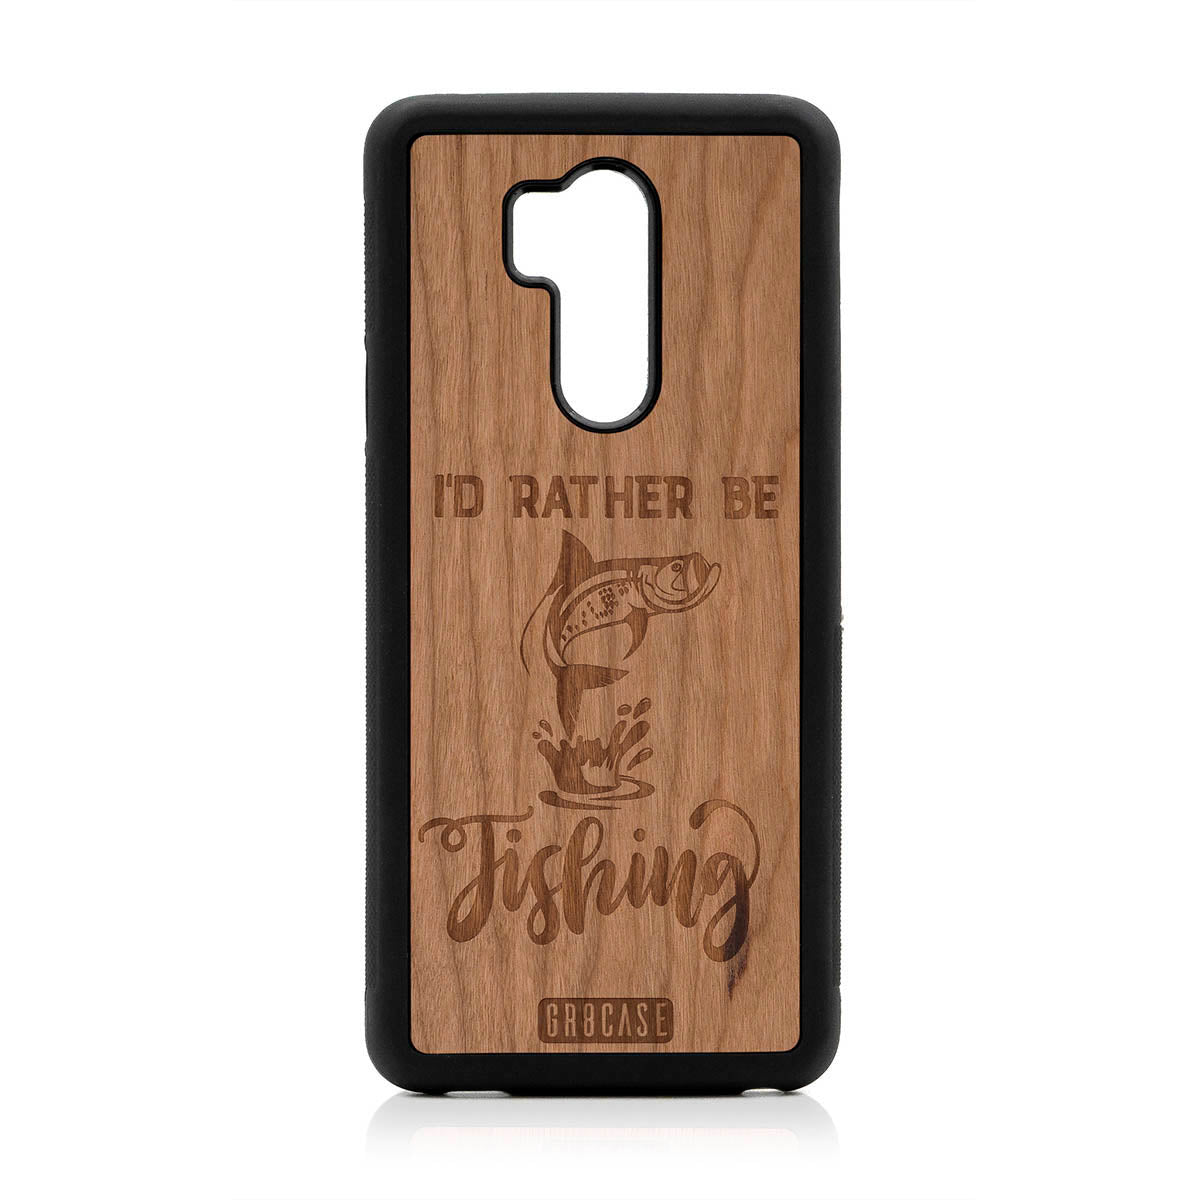 I'D Rather Be Fishing Design Wood Case For LG G7 ThinQ